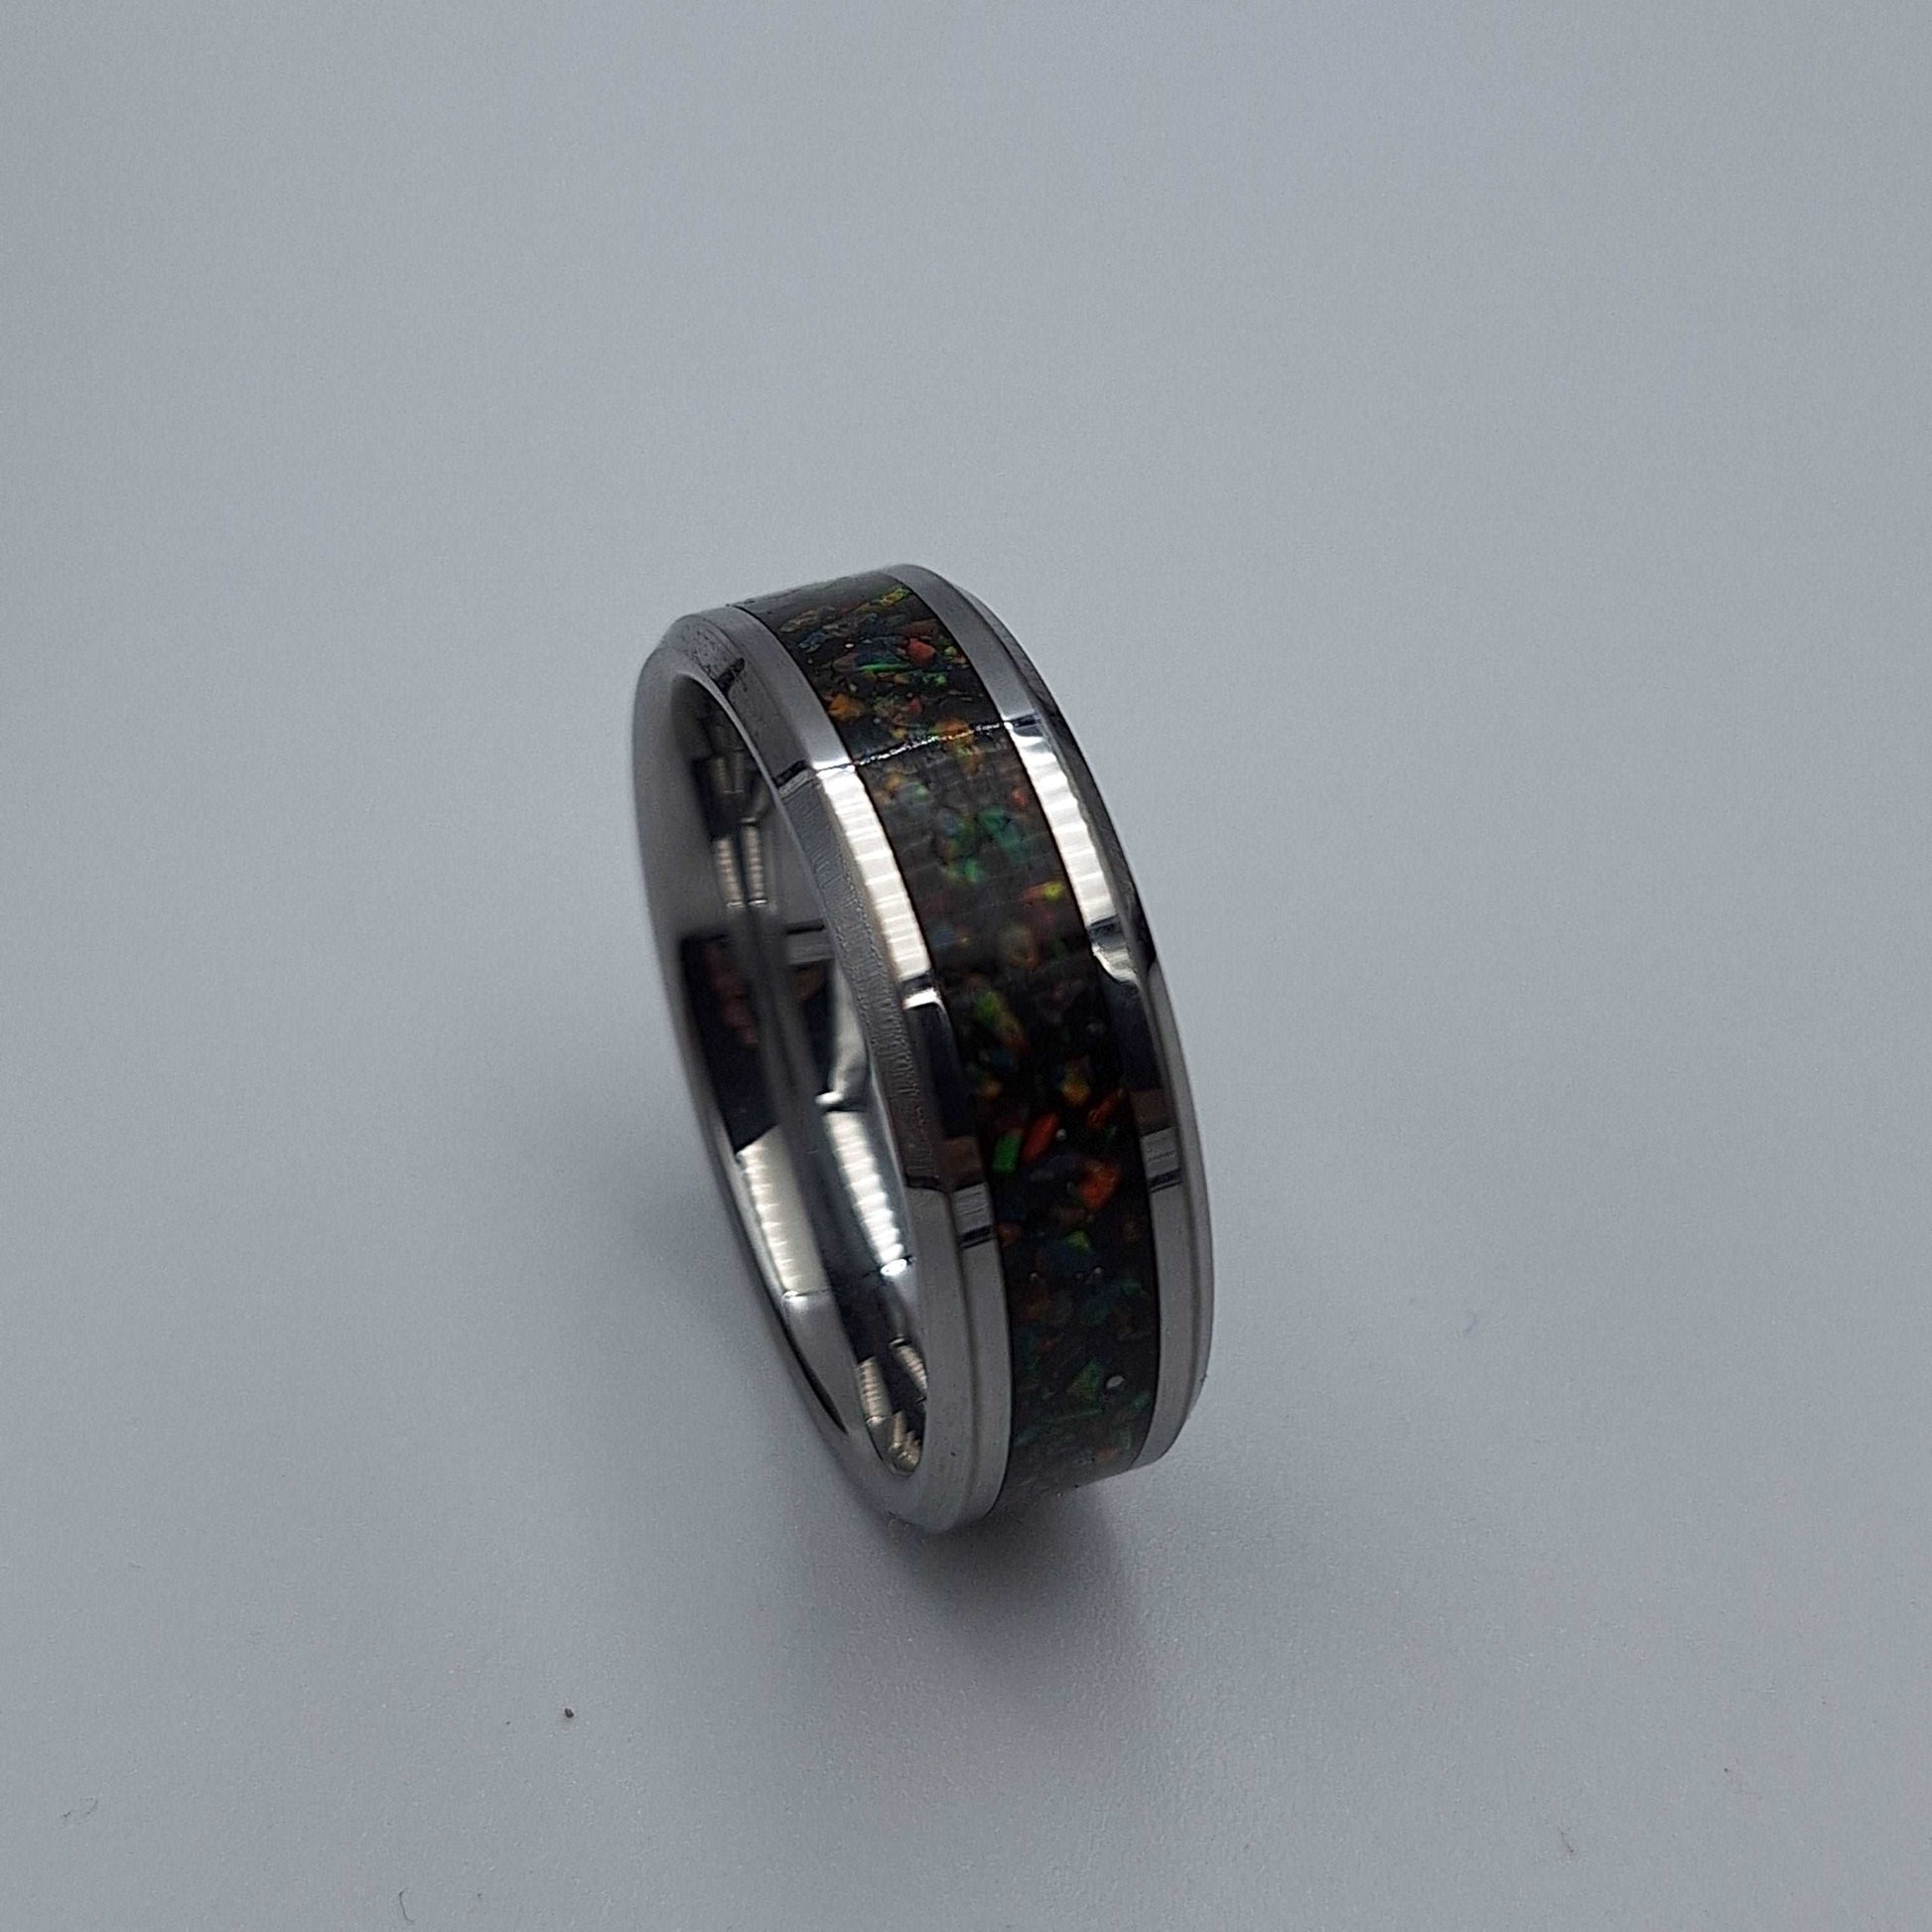 Tungsten Metal 8mm Ring With Crushed Opals - Size 13